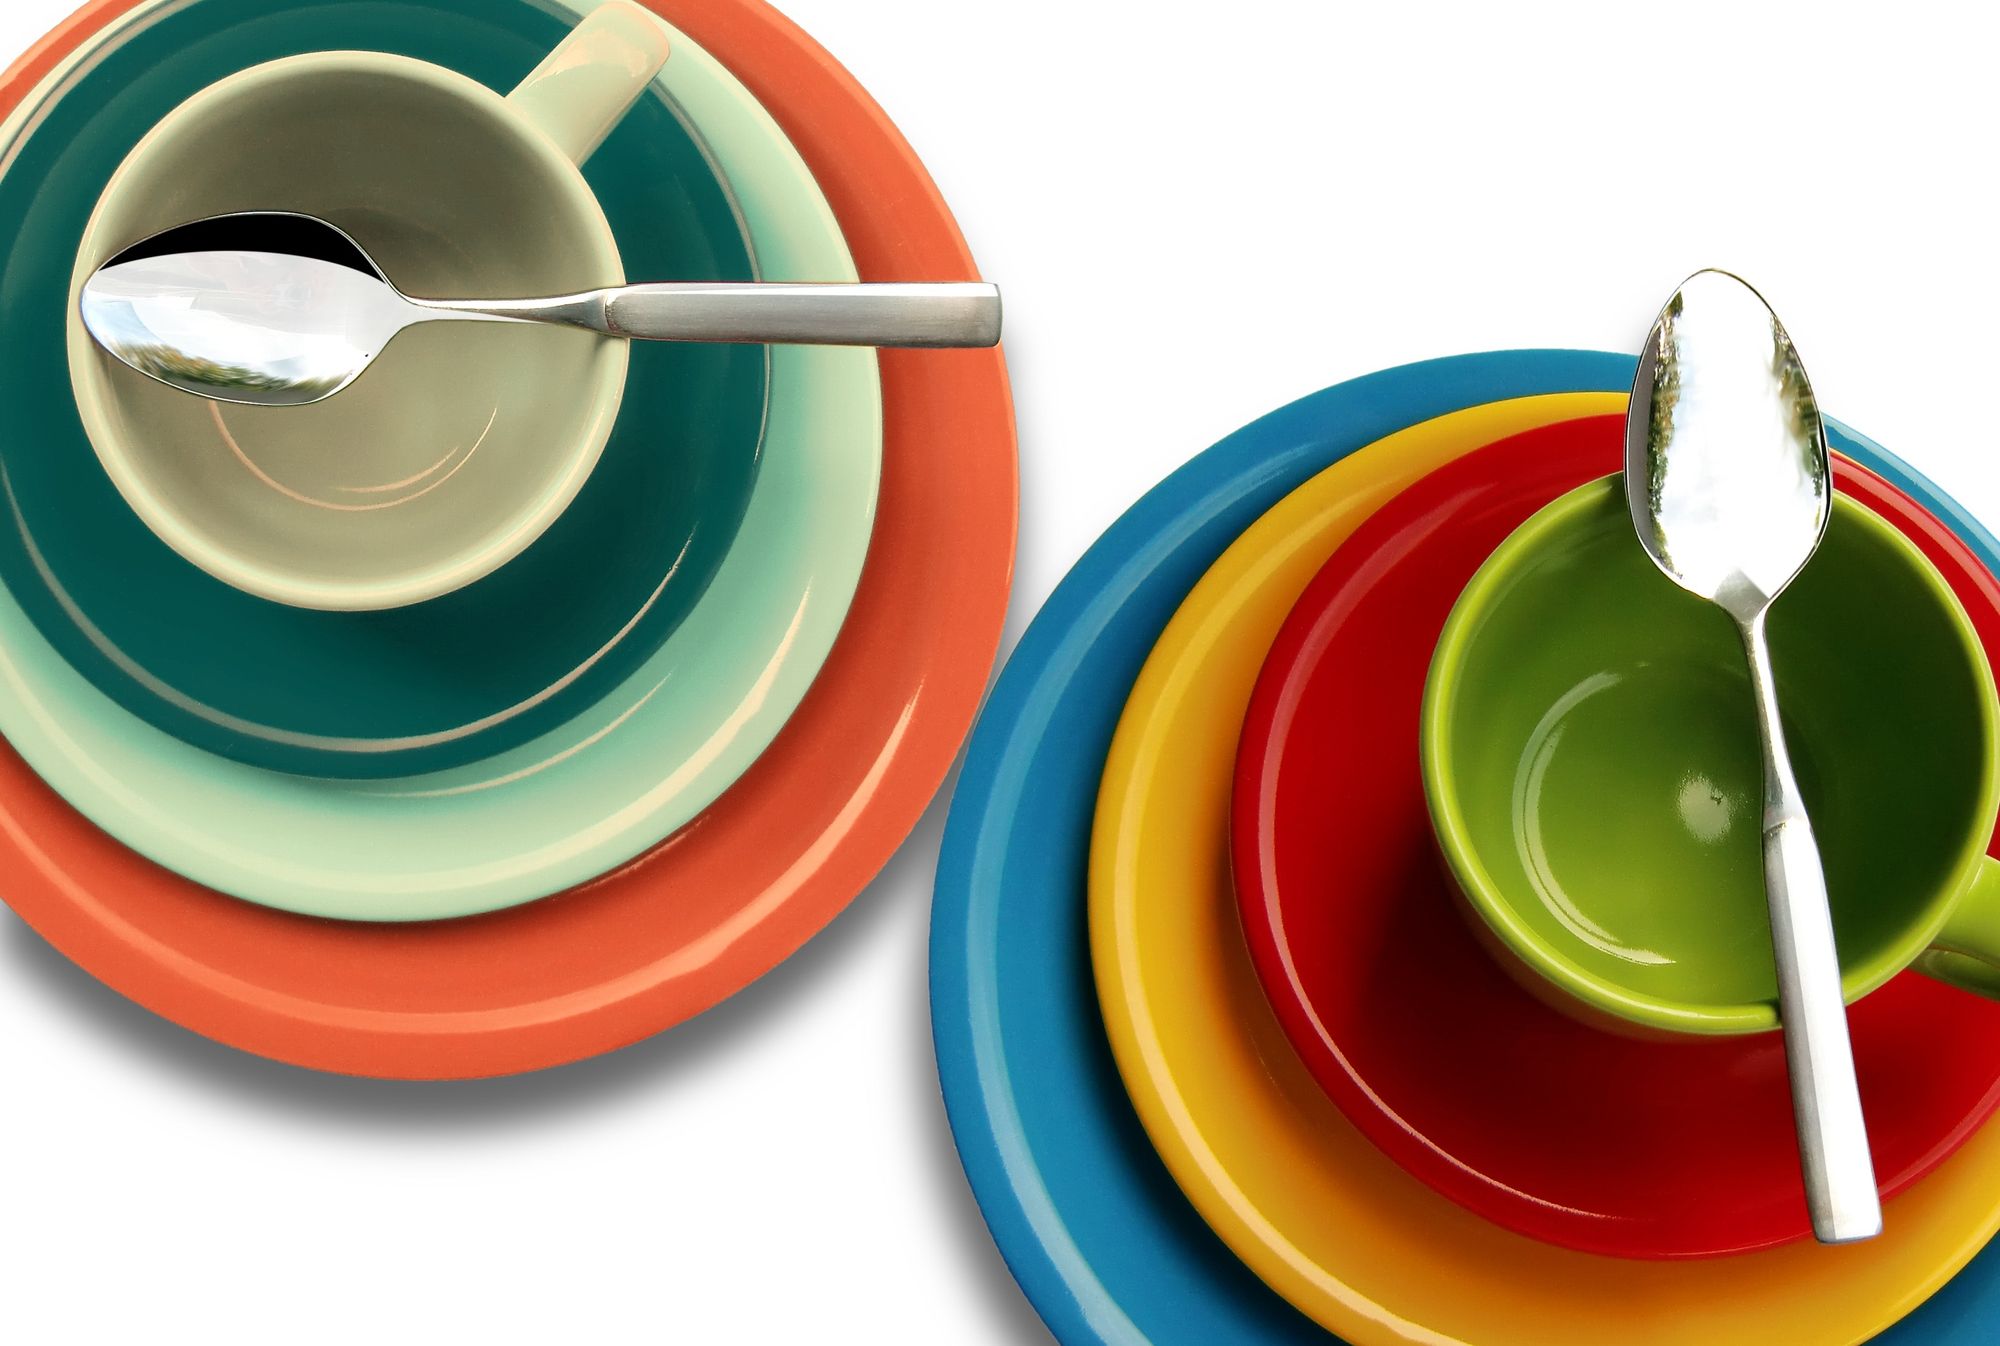 Colorful plates of different sizes.